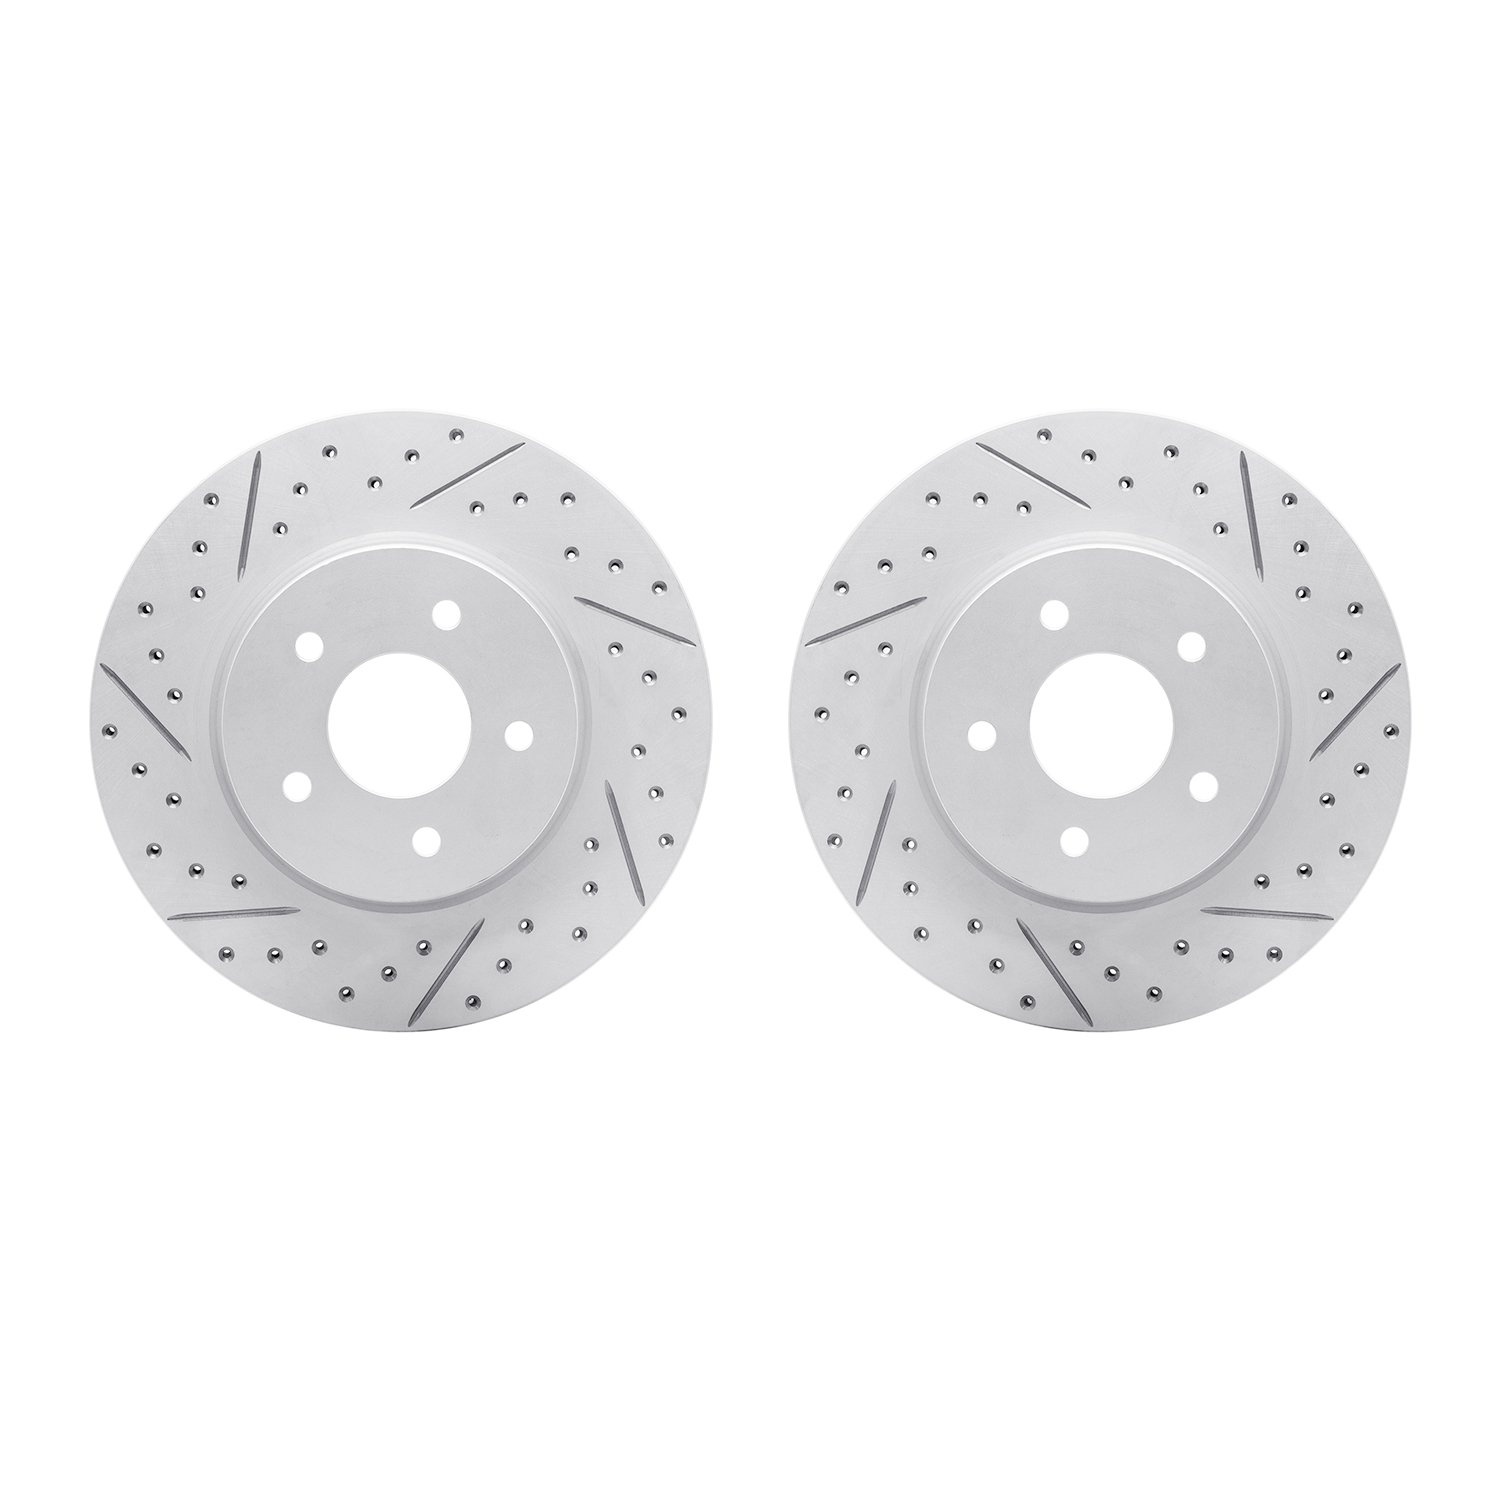 2002-68012 Geoperformance Drilled/Slotted Brake Rotors, Fits Select Infiniti/Nissan, Position: Rear